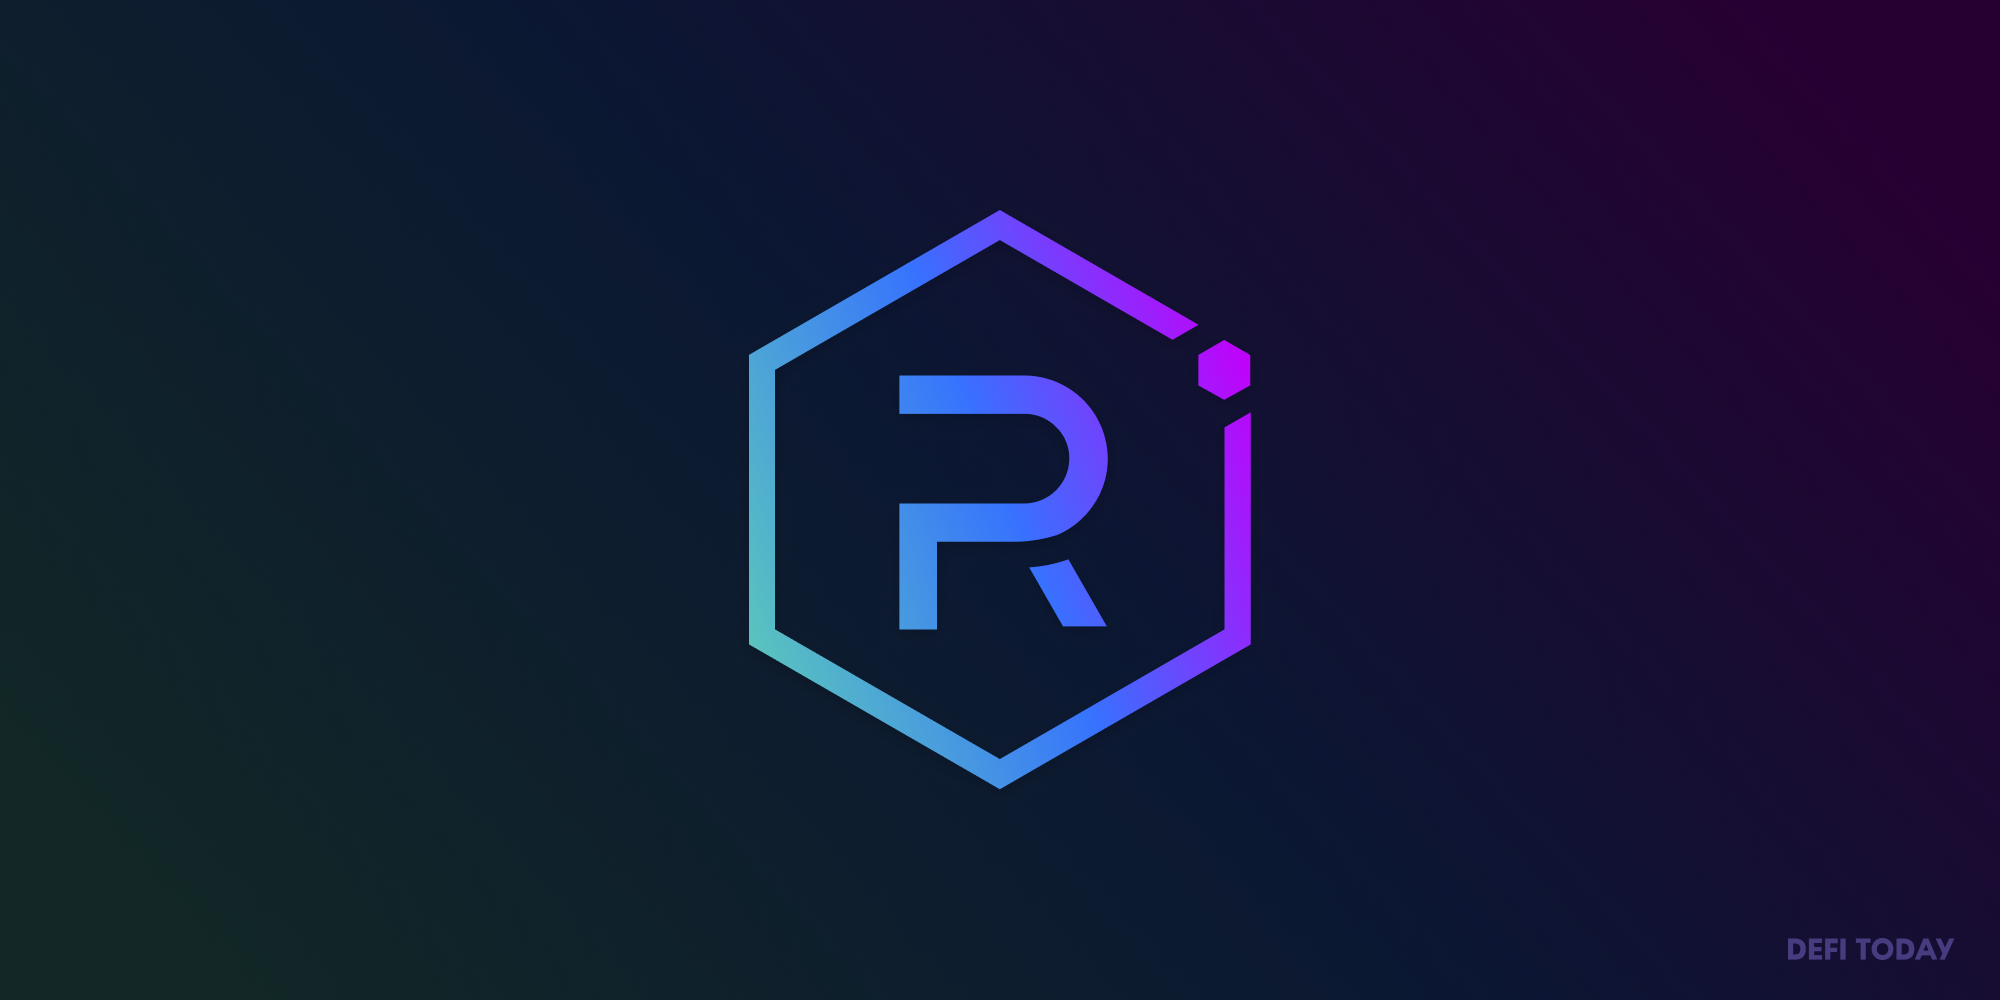 Raydium: Onboarding DeFi to a Better Blockchain | DEFI TODAY